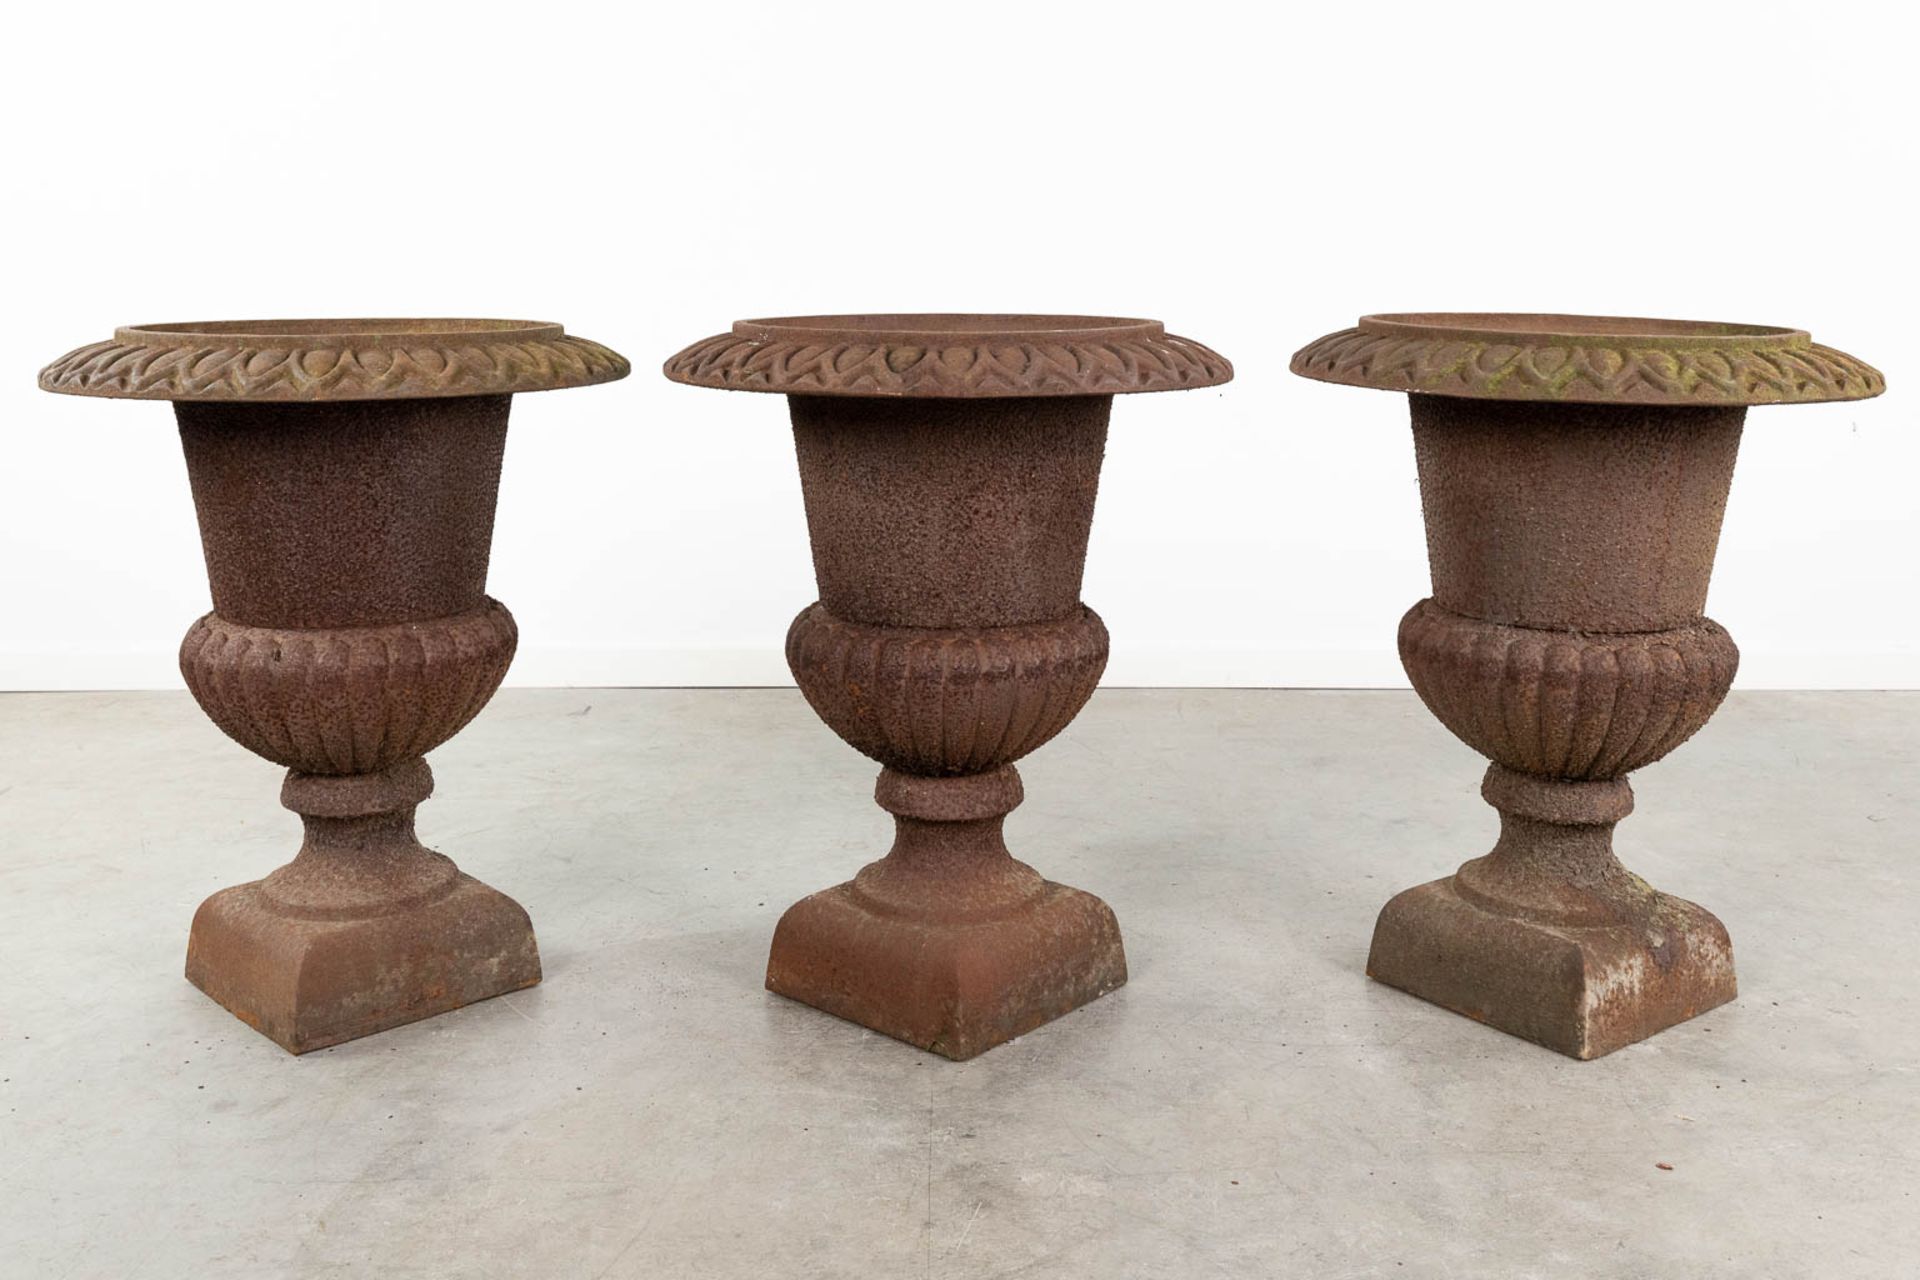 A collection of 3 large garden vases made of cast iron. (H: 67 x D: 55 cm) - Image 4 of 9